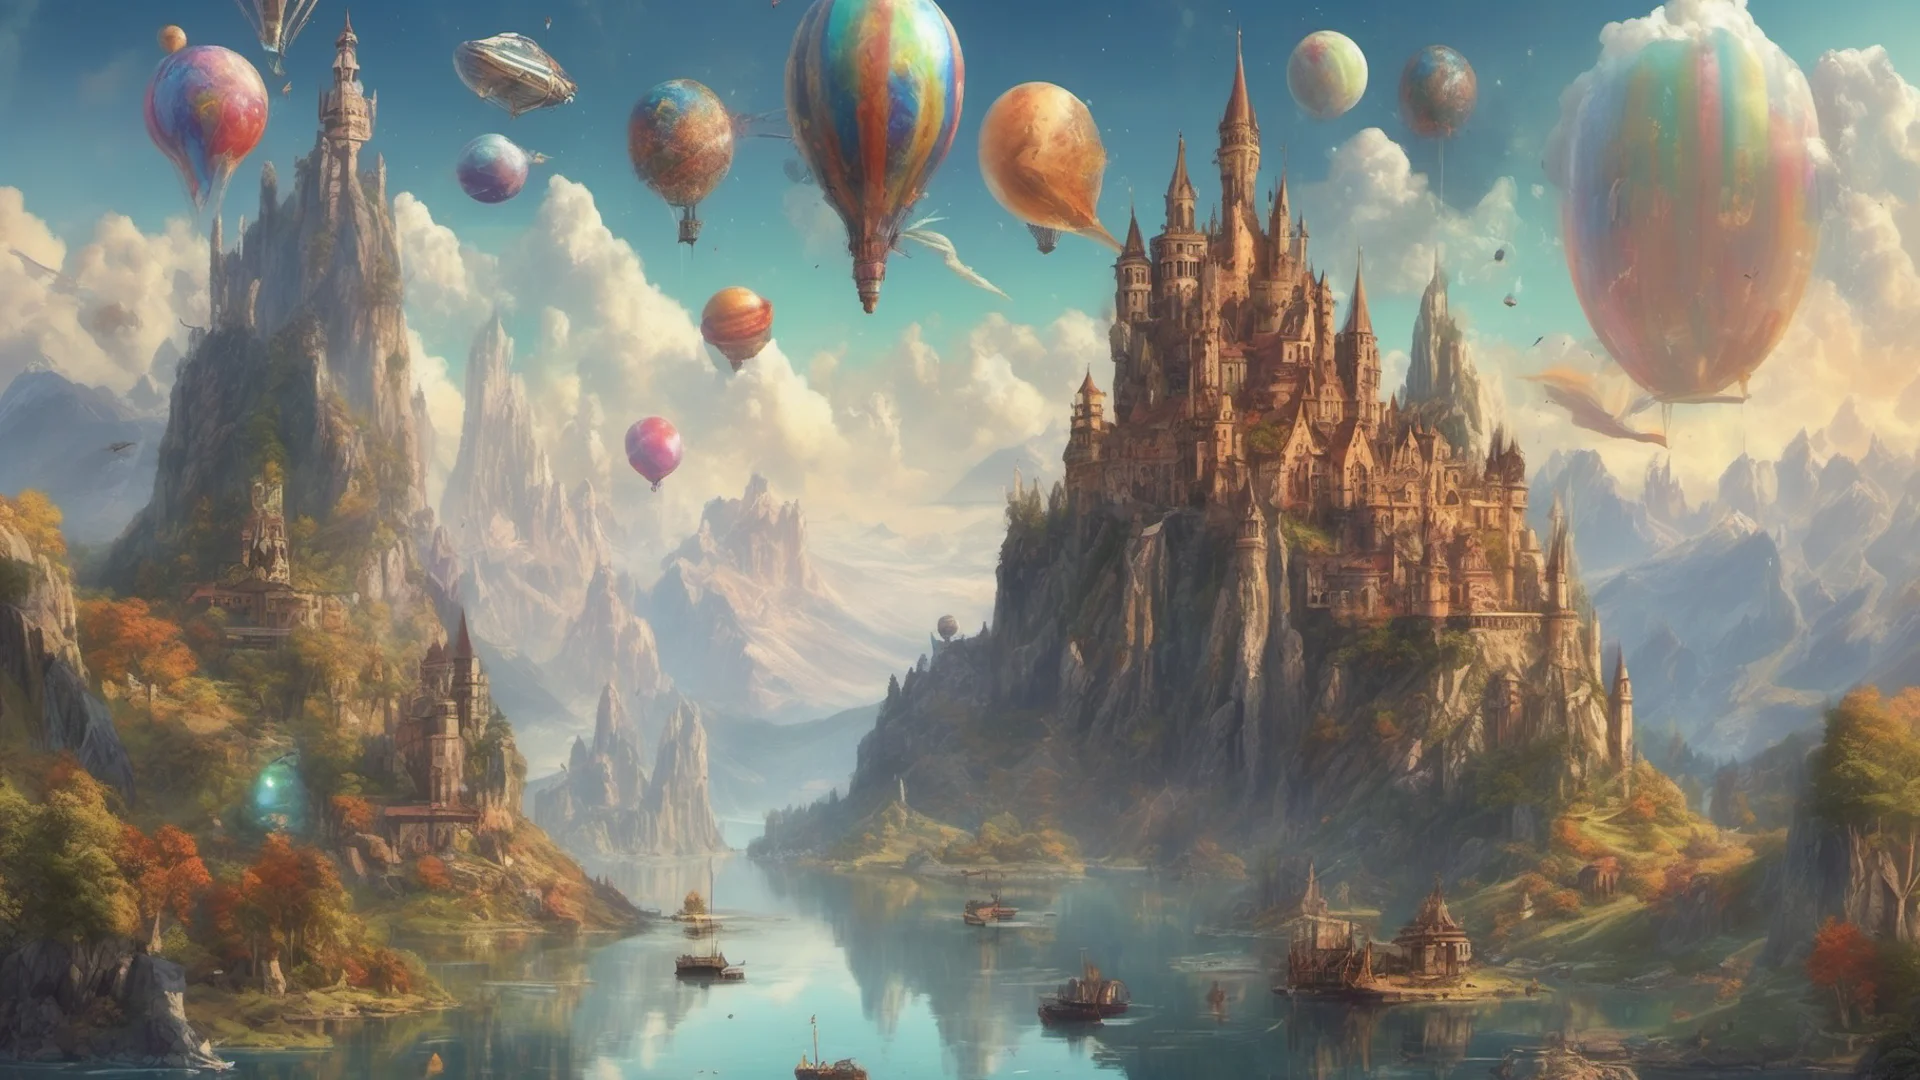 epic fantasy environment castle on tall mountain lakes sky with many colorful planets boats sailing airships and blimps floating   amazing awesome portrait 2 wide